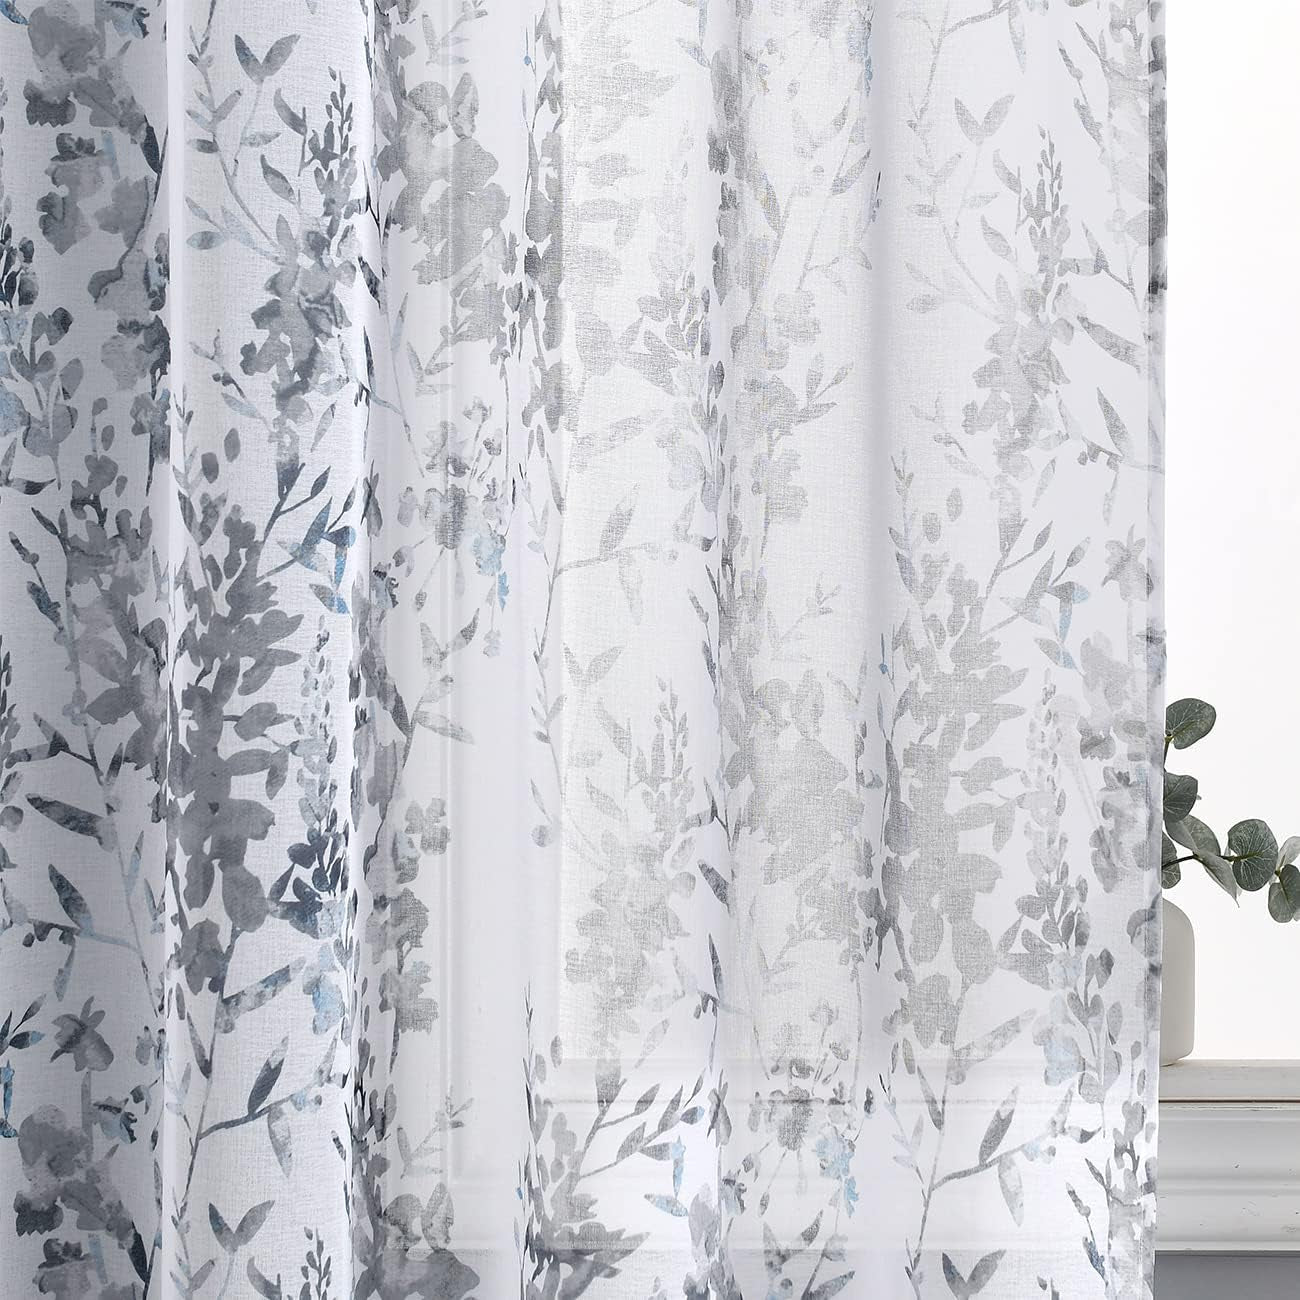 Kotile Grey White Sheer Curtains, Classic Vintage Branch Leaf Printed Sheer Curtains 63 Inch Length 2 Panels Set, Privacy Rod Pocket Sheer Window Floral Curtains, 50 X 63 Inch, Grey  Kotile Textile Grey W50 X L96 Inch 